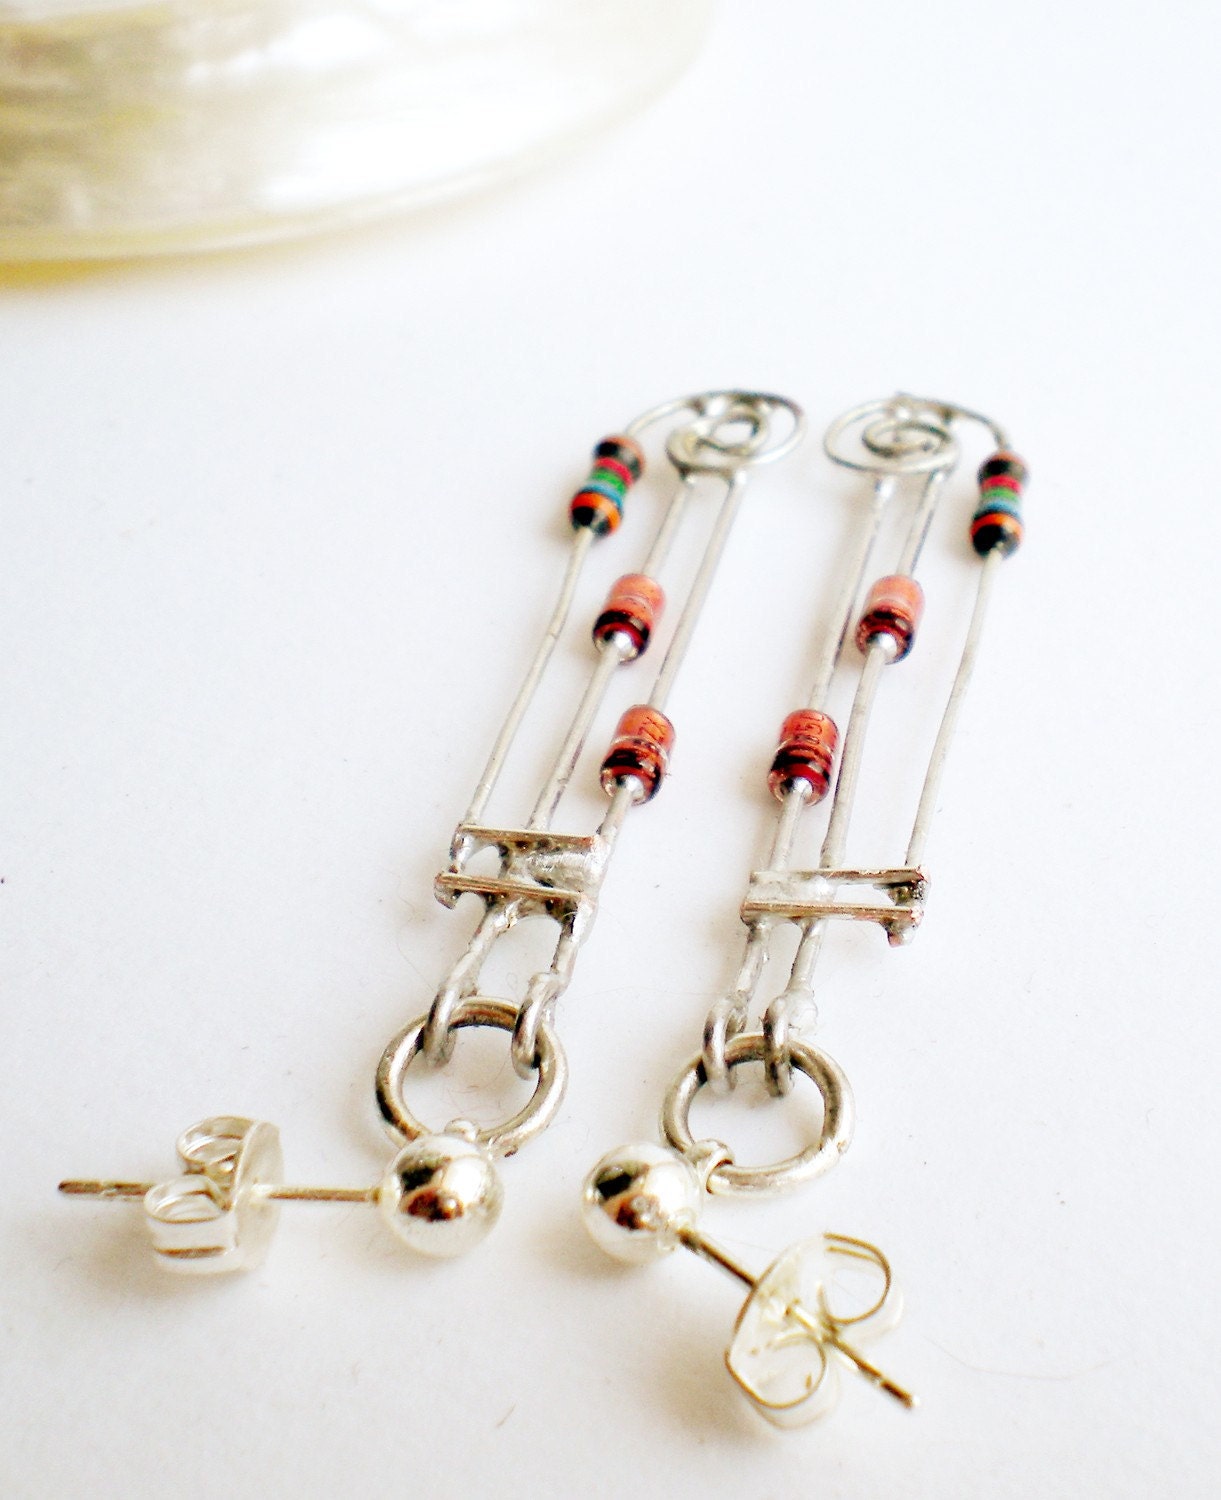 Earrings Dangle with Posts, Red Orange Earrings with Three Lines with a twist - Aula46